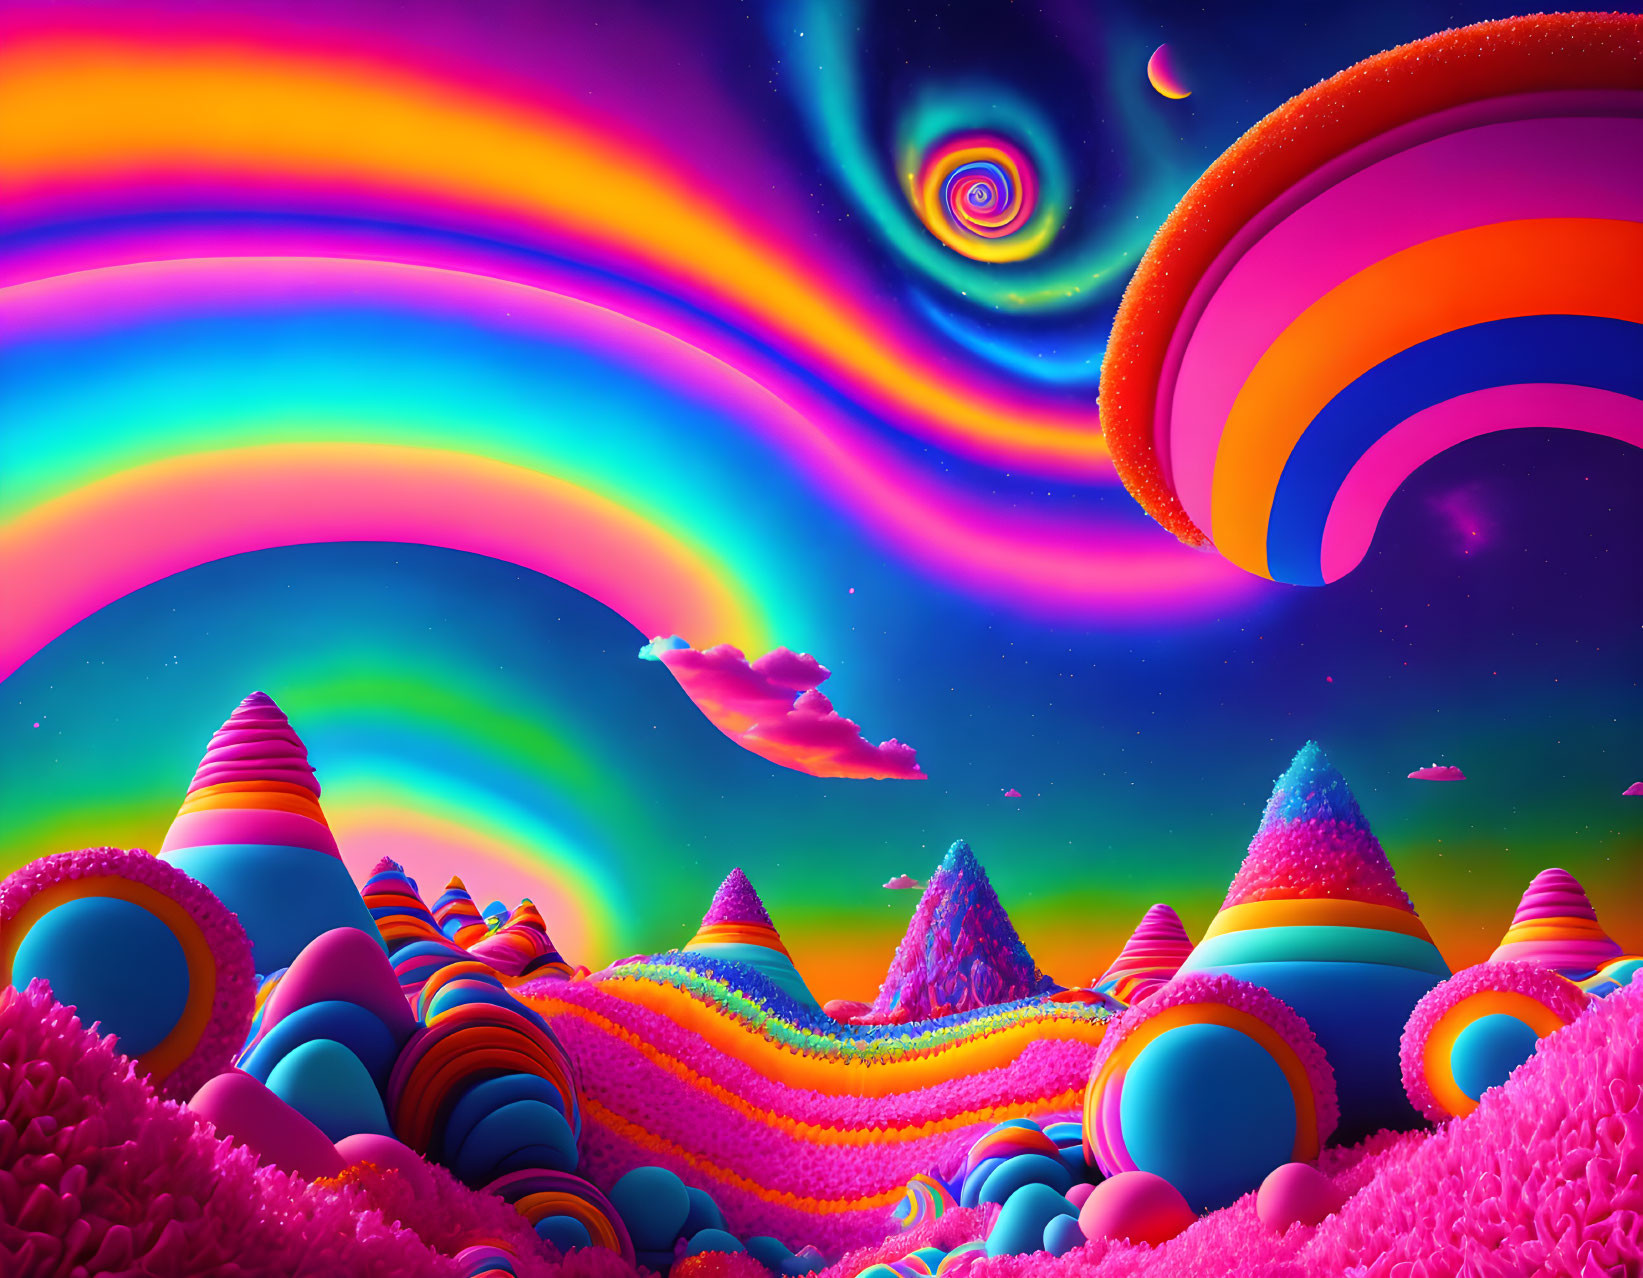 Colorful Psychedelic Landscape with Neon Skies and Cosmic Background